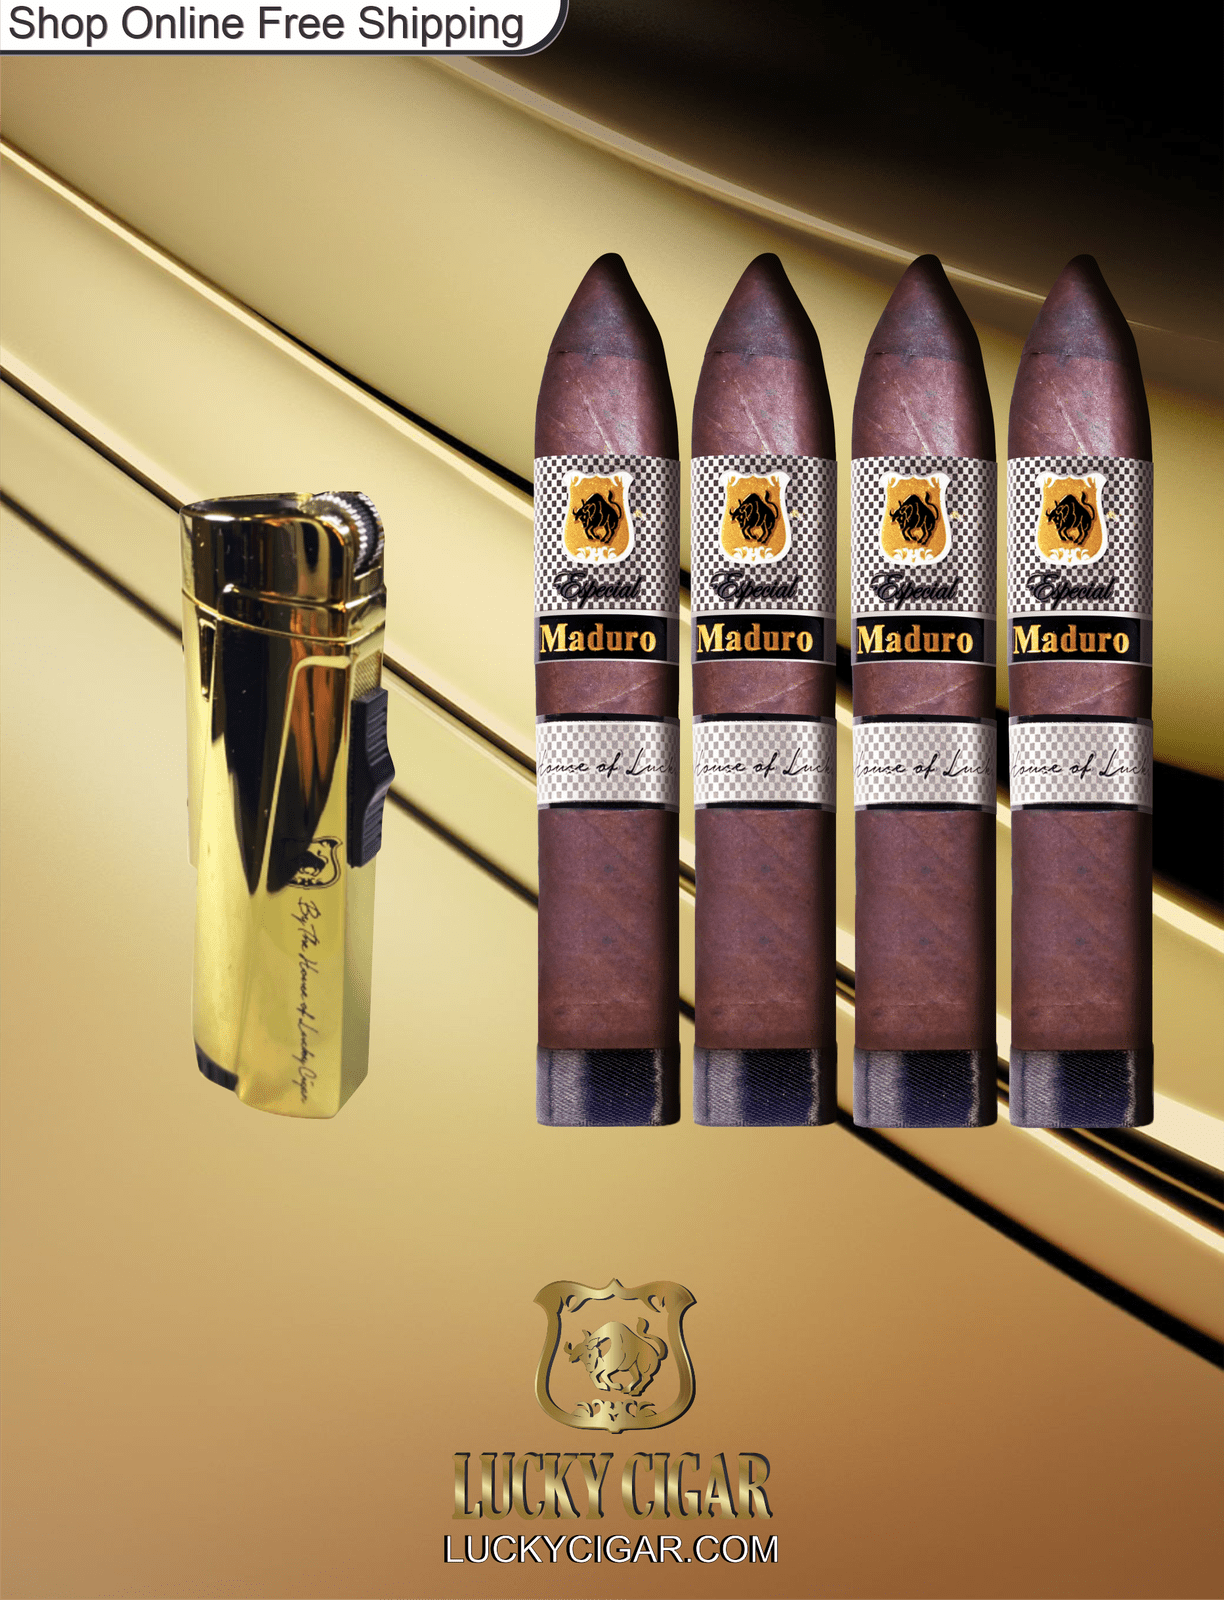 Lucky Cigar Sampler Sets: Set of 4 Especial Maduro Cigars with Torch